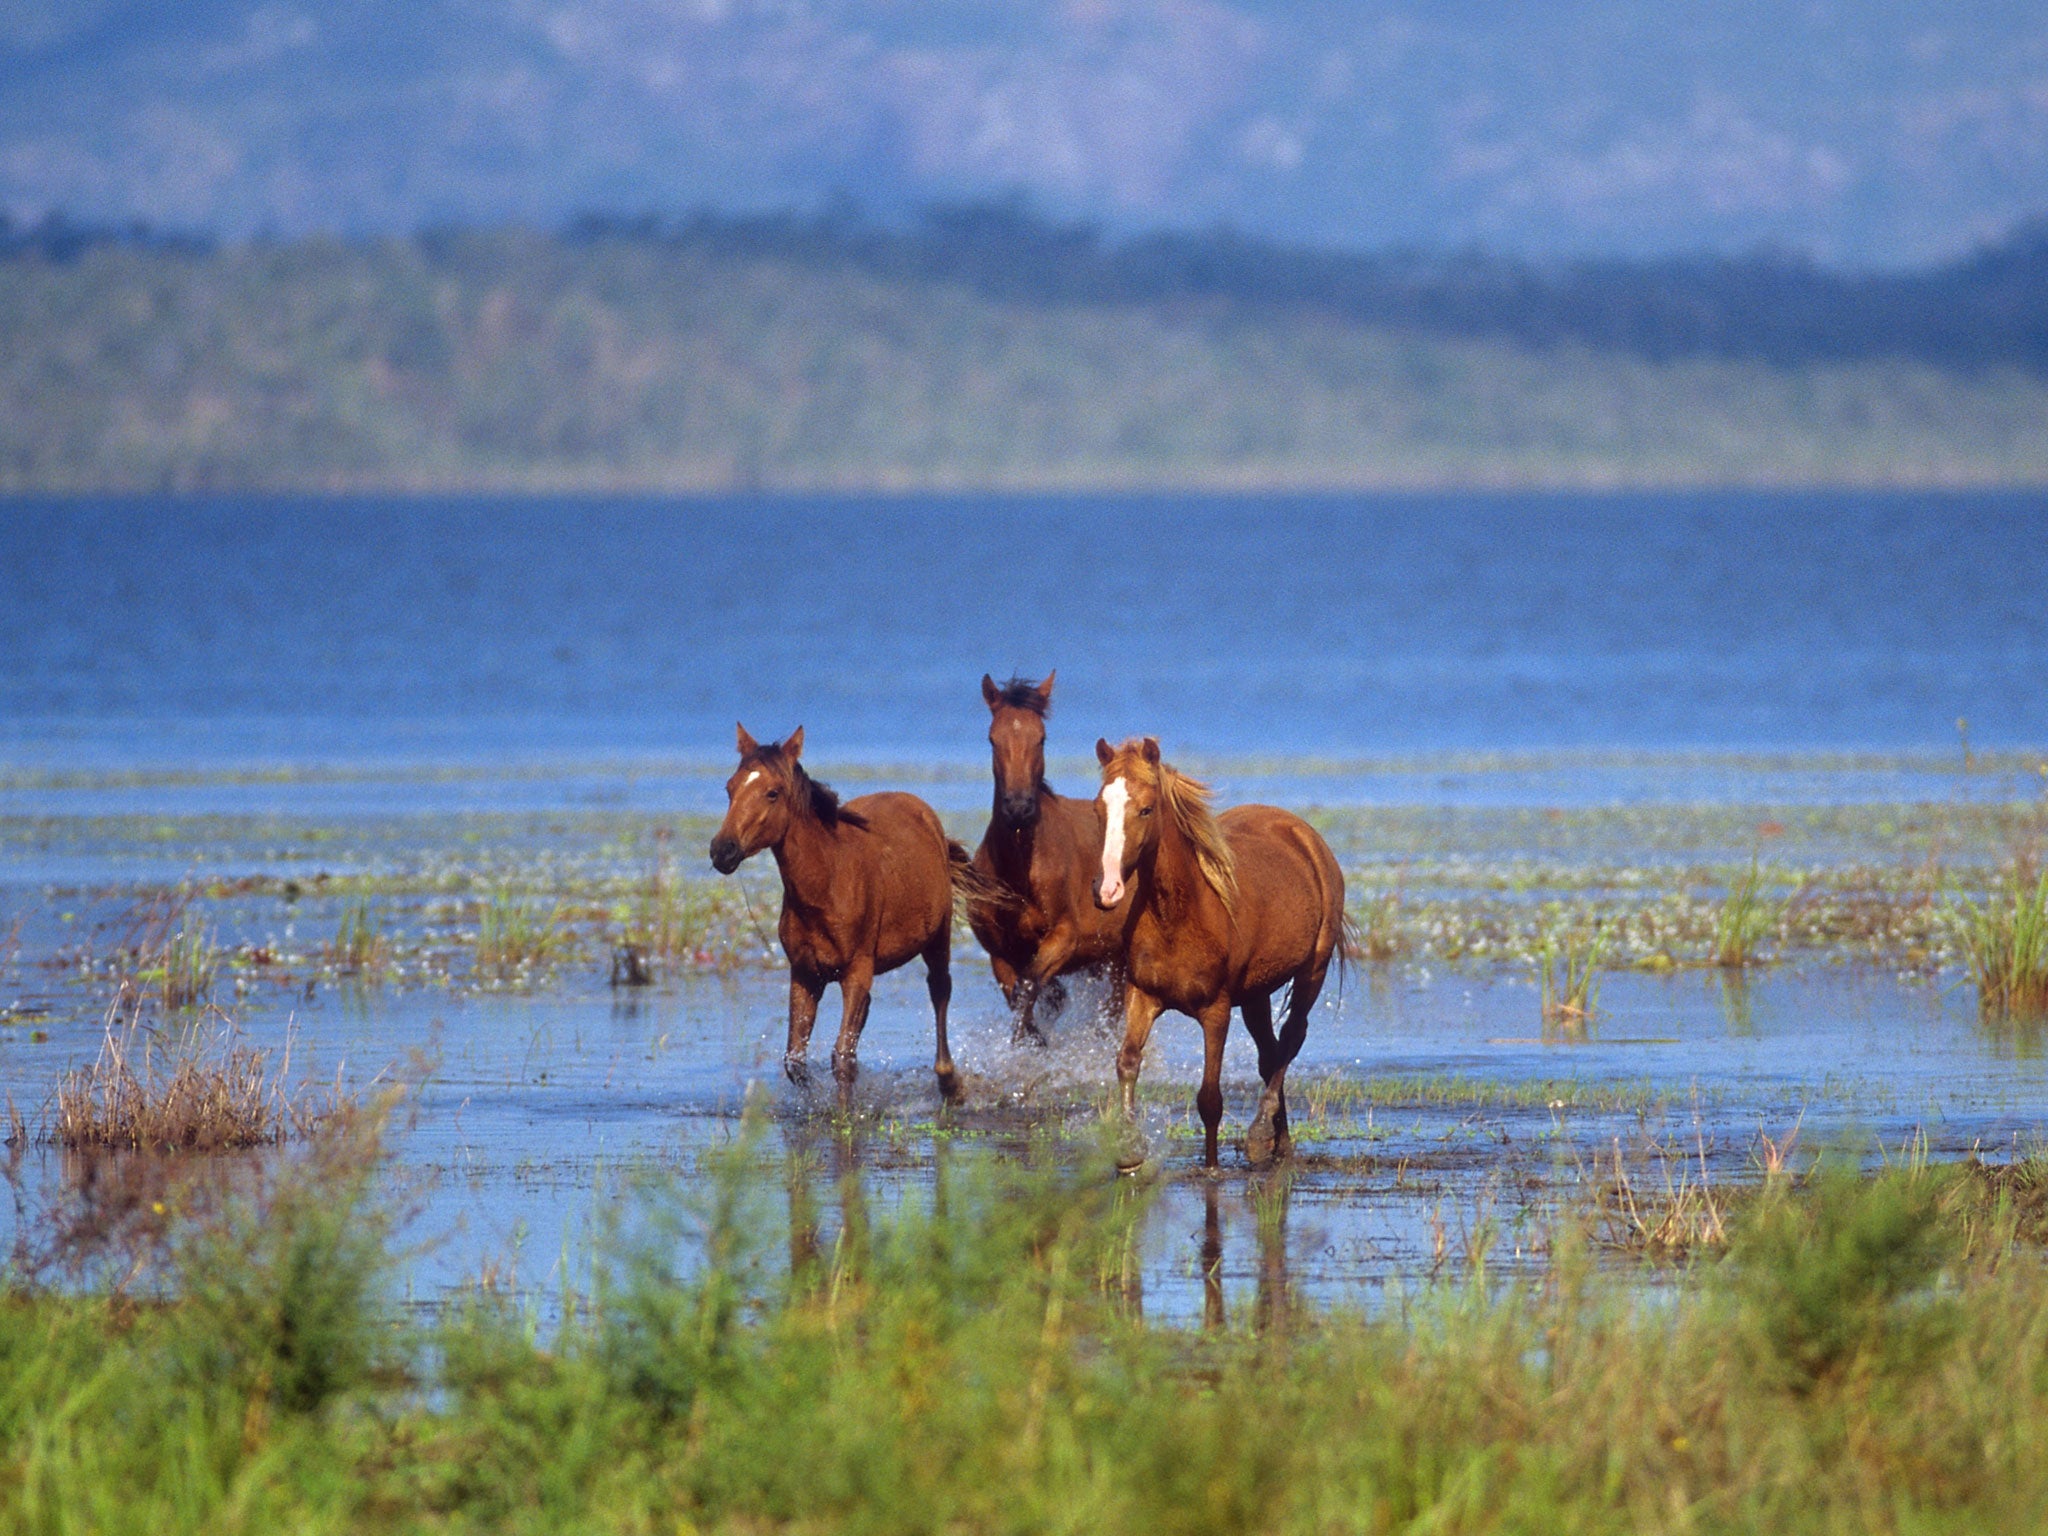 Brumbies are descendants of horses released into the wild and symbolise the romance of the outback for many Australians